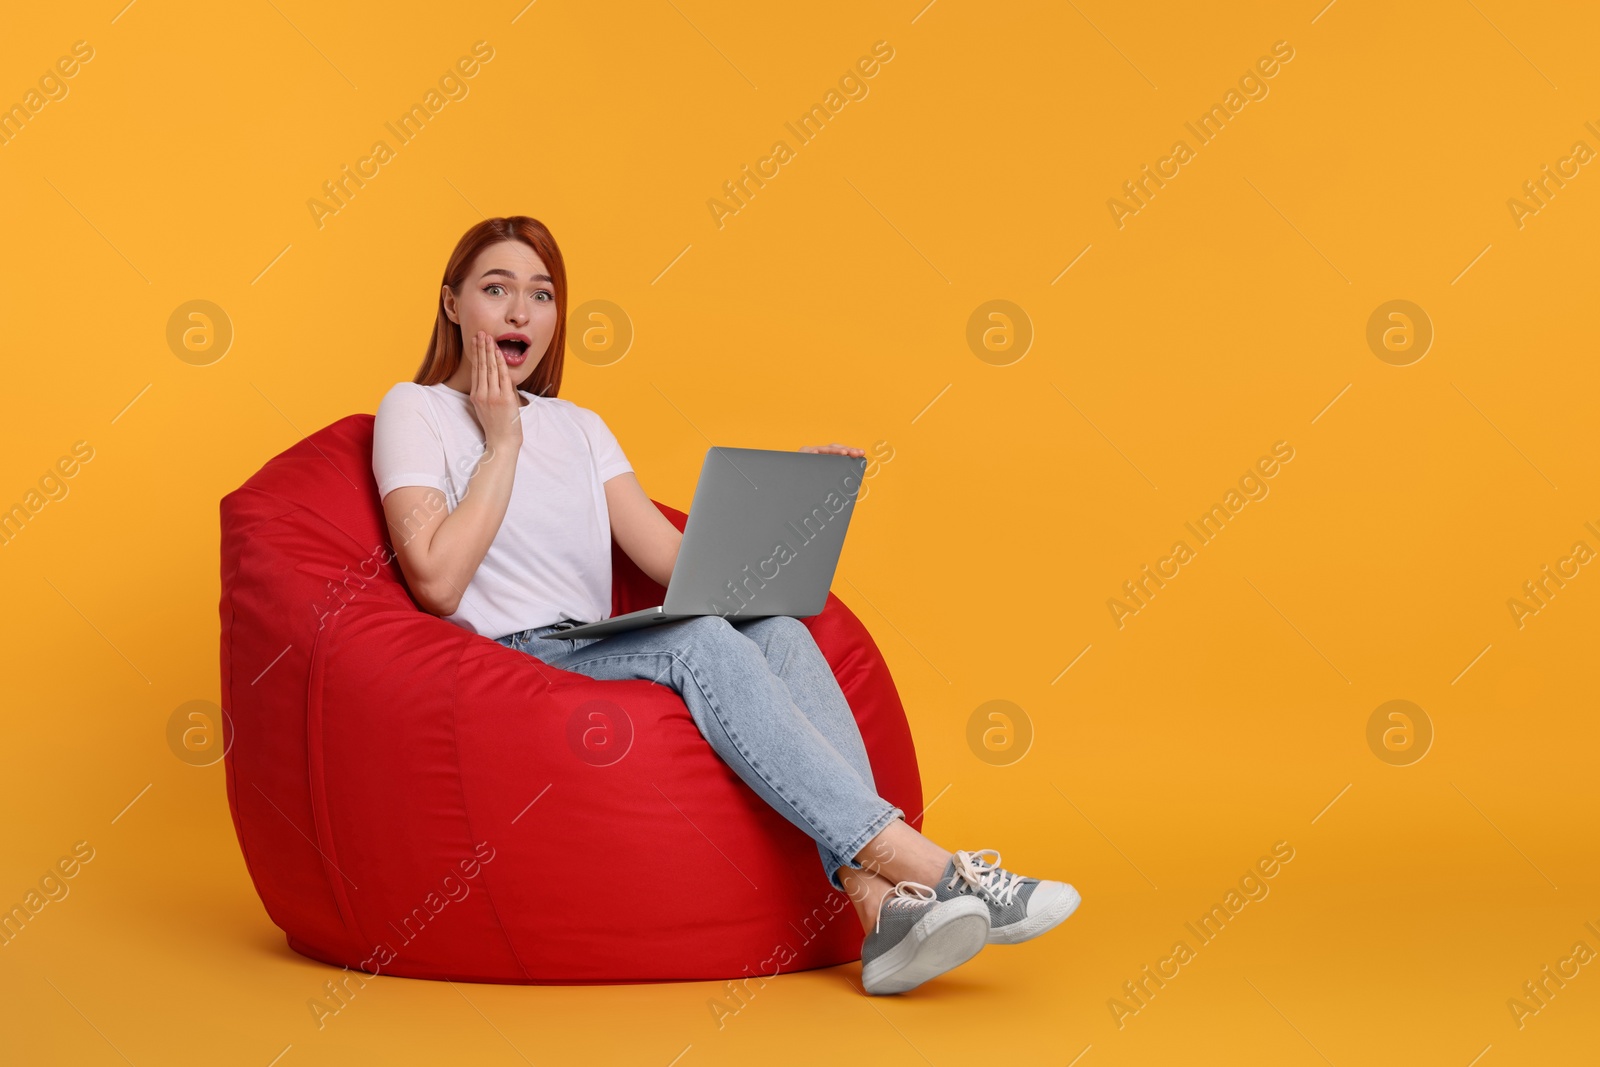 Photo of Surprised young woman with laptop sitting on beanbag chair against yellow background